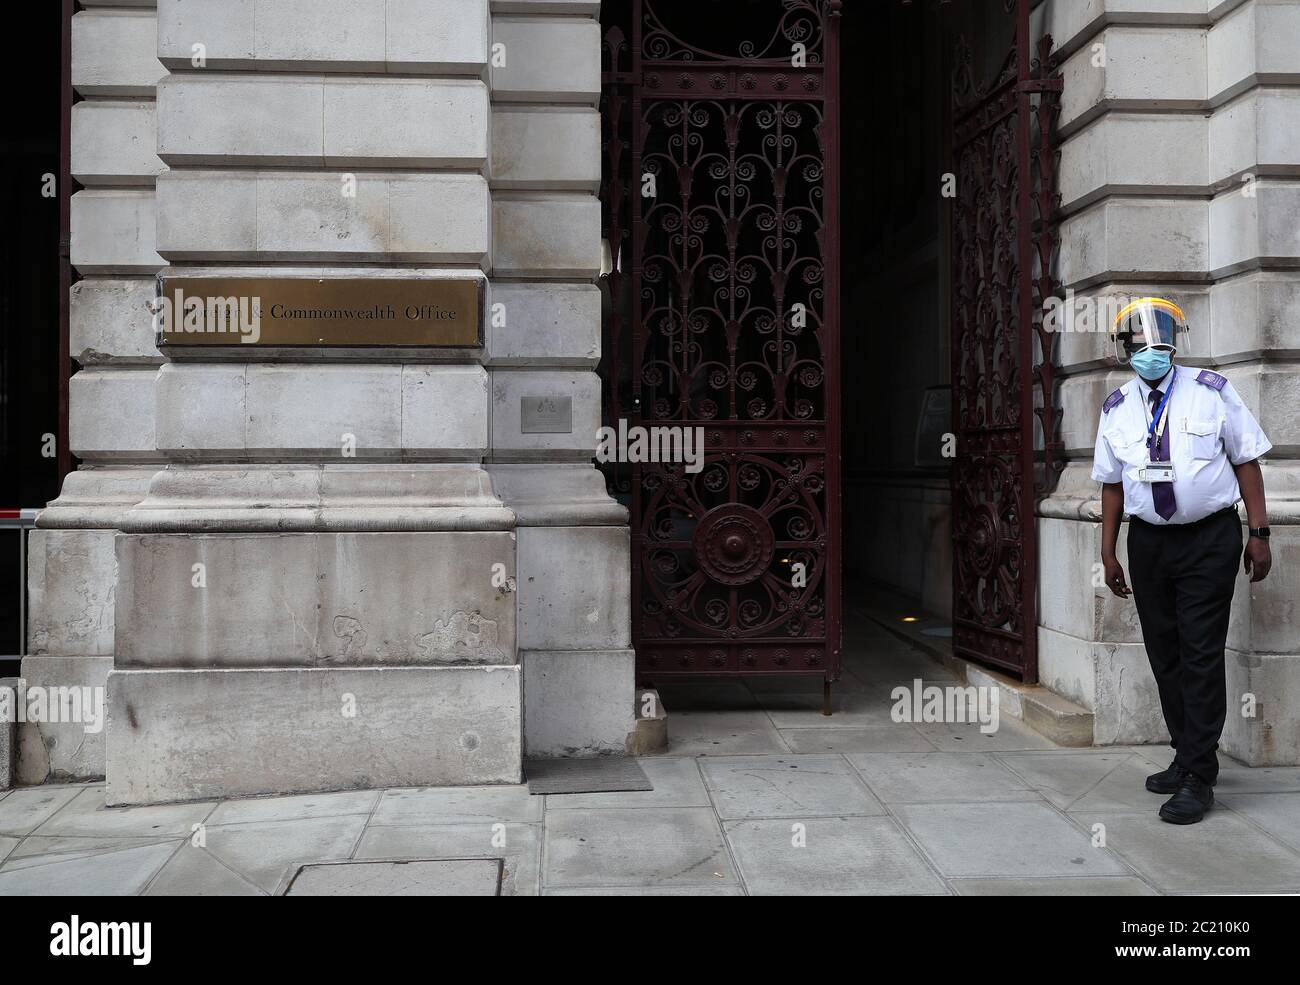 An entrance of the Foreign & Commonwealth Office in Whitehall, London. Prime Minister Boris Johnson has announced that he has merged the Department for International Development (Dfid) with the Foreign Office, creating a new department, the Foreign Commonwealth and Development Office. Stock Photo